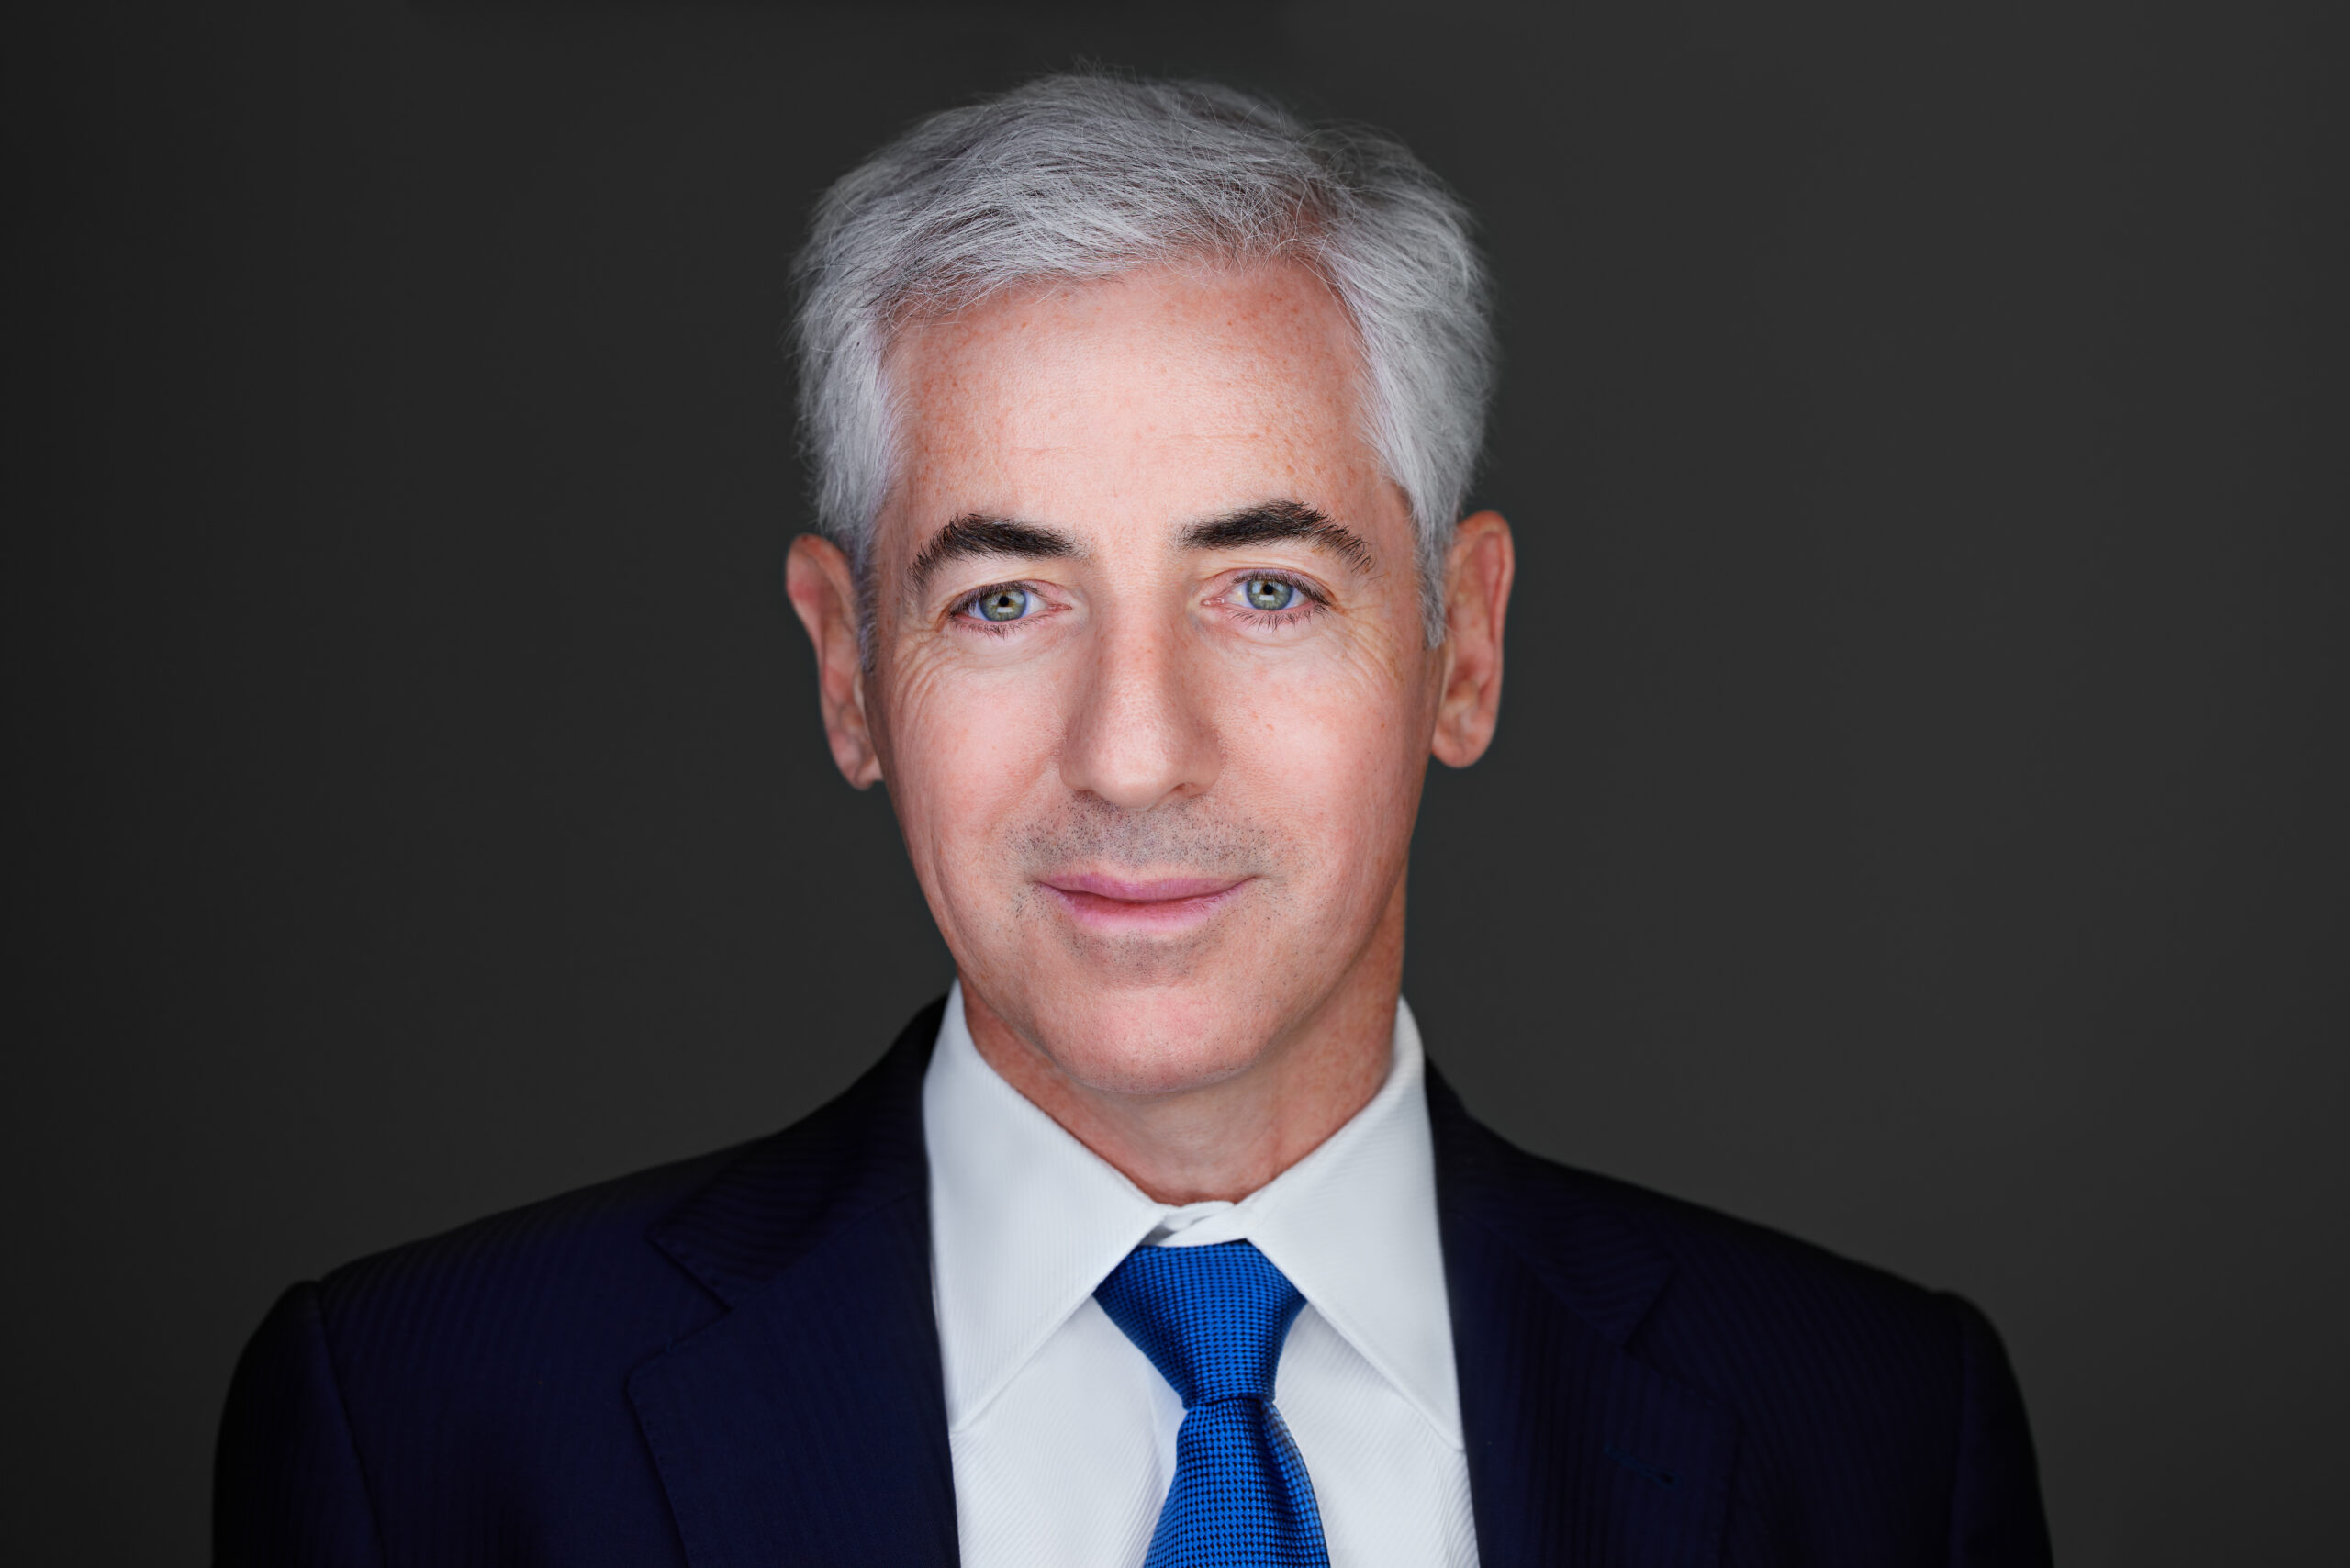 Bill ackman headshot peter hurley photography scaled